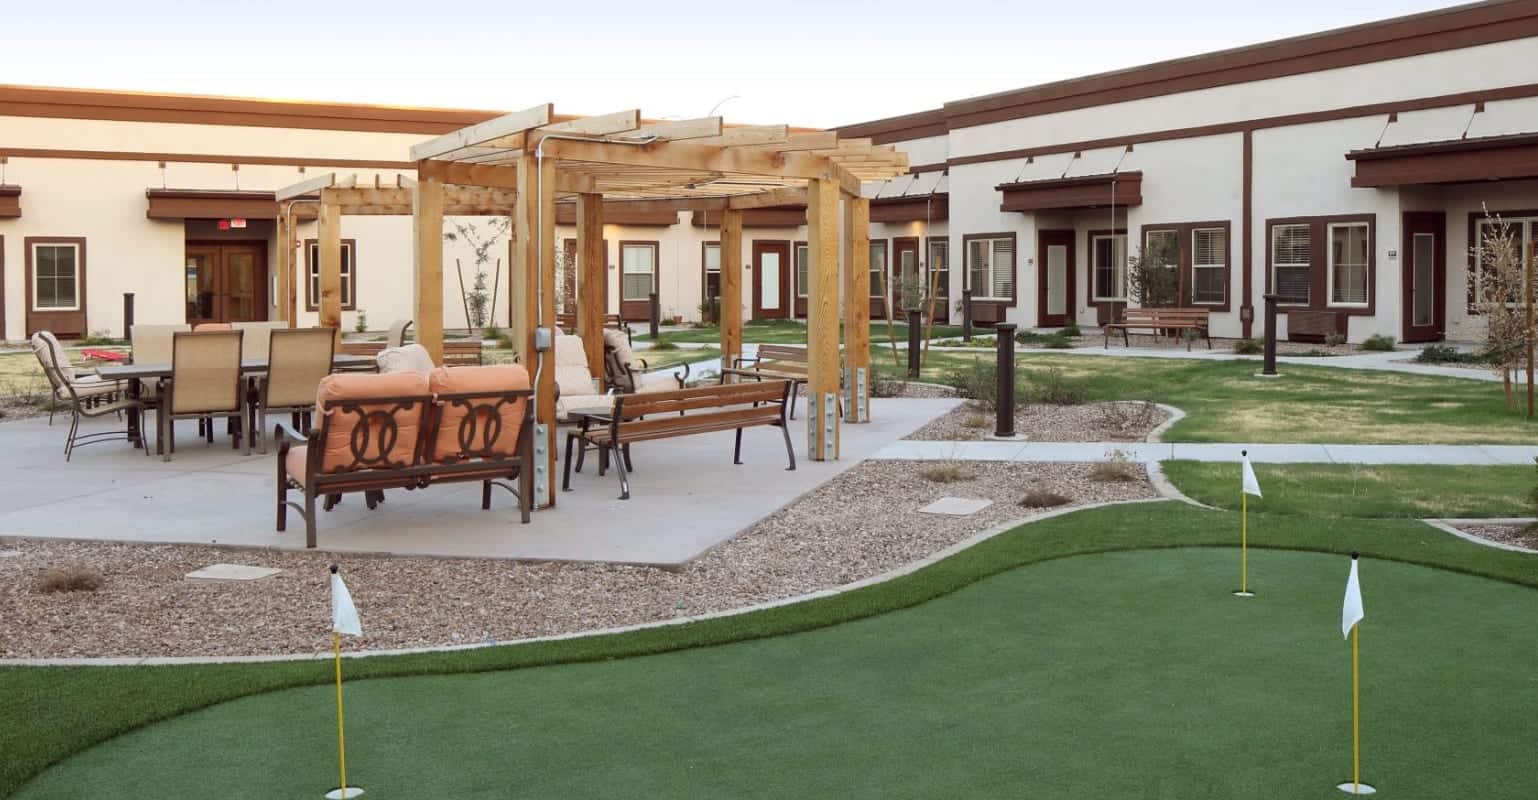 An outdoor sitting area and putting green at Sky Vista Senior Living.